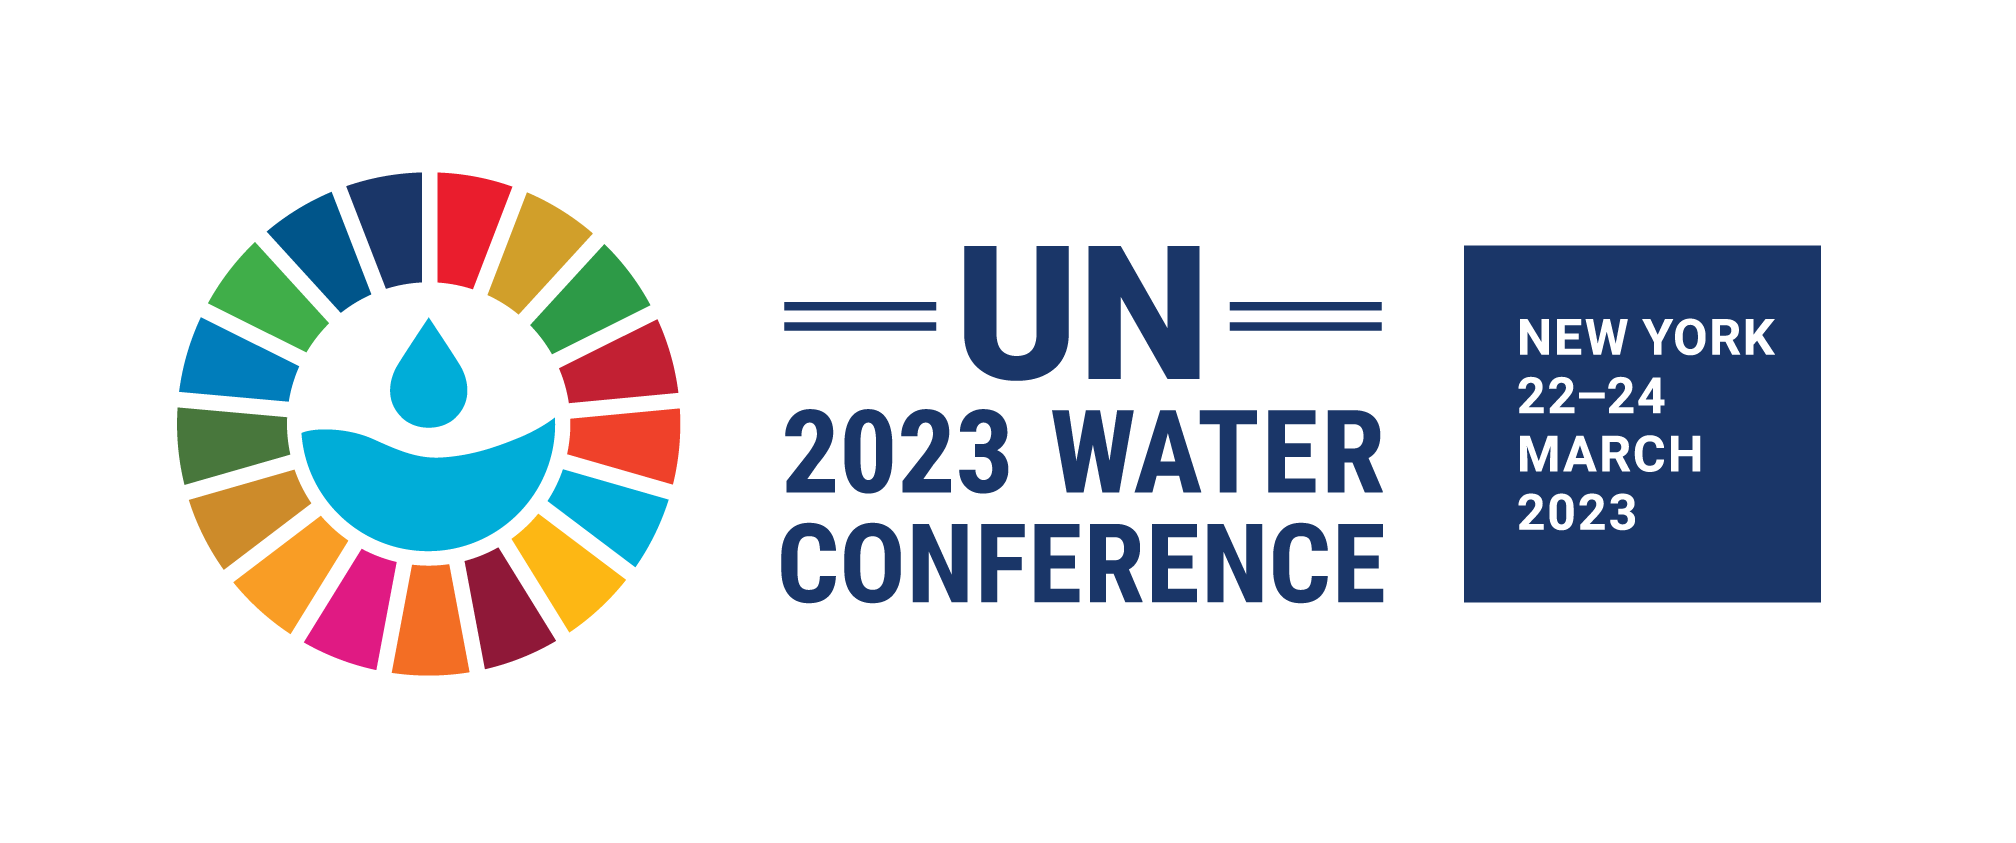 UN Water conference logo and banner